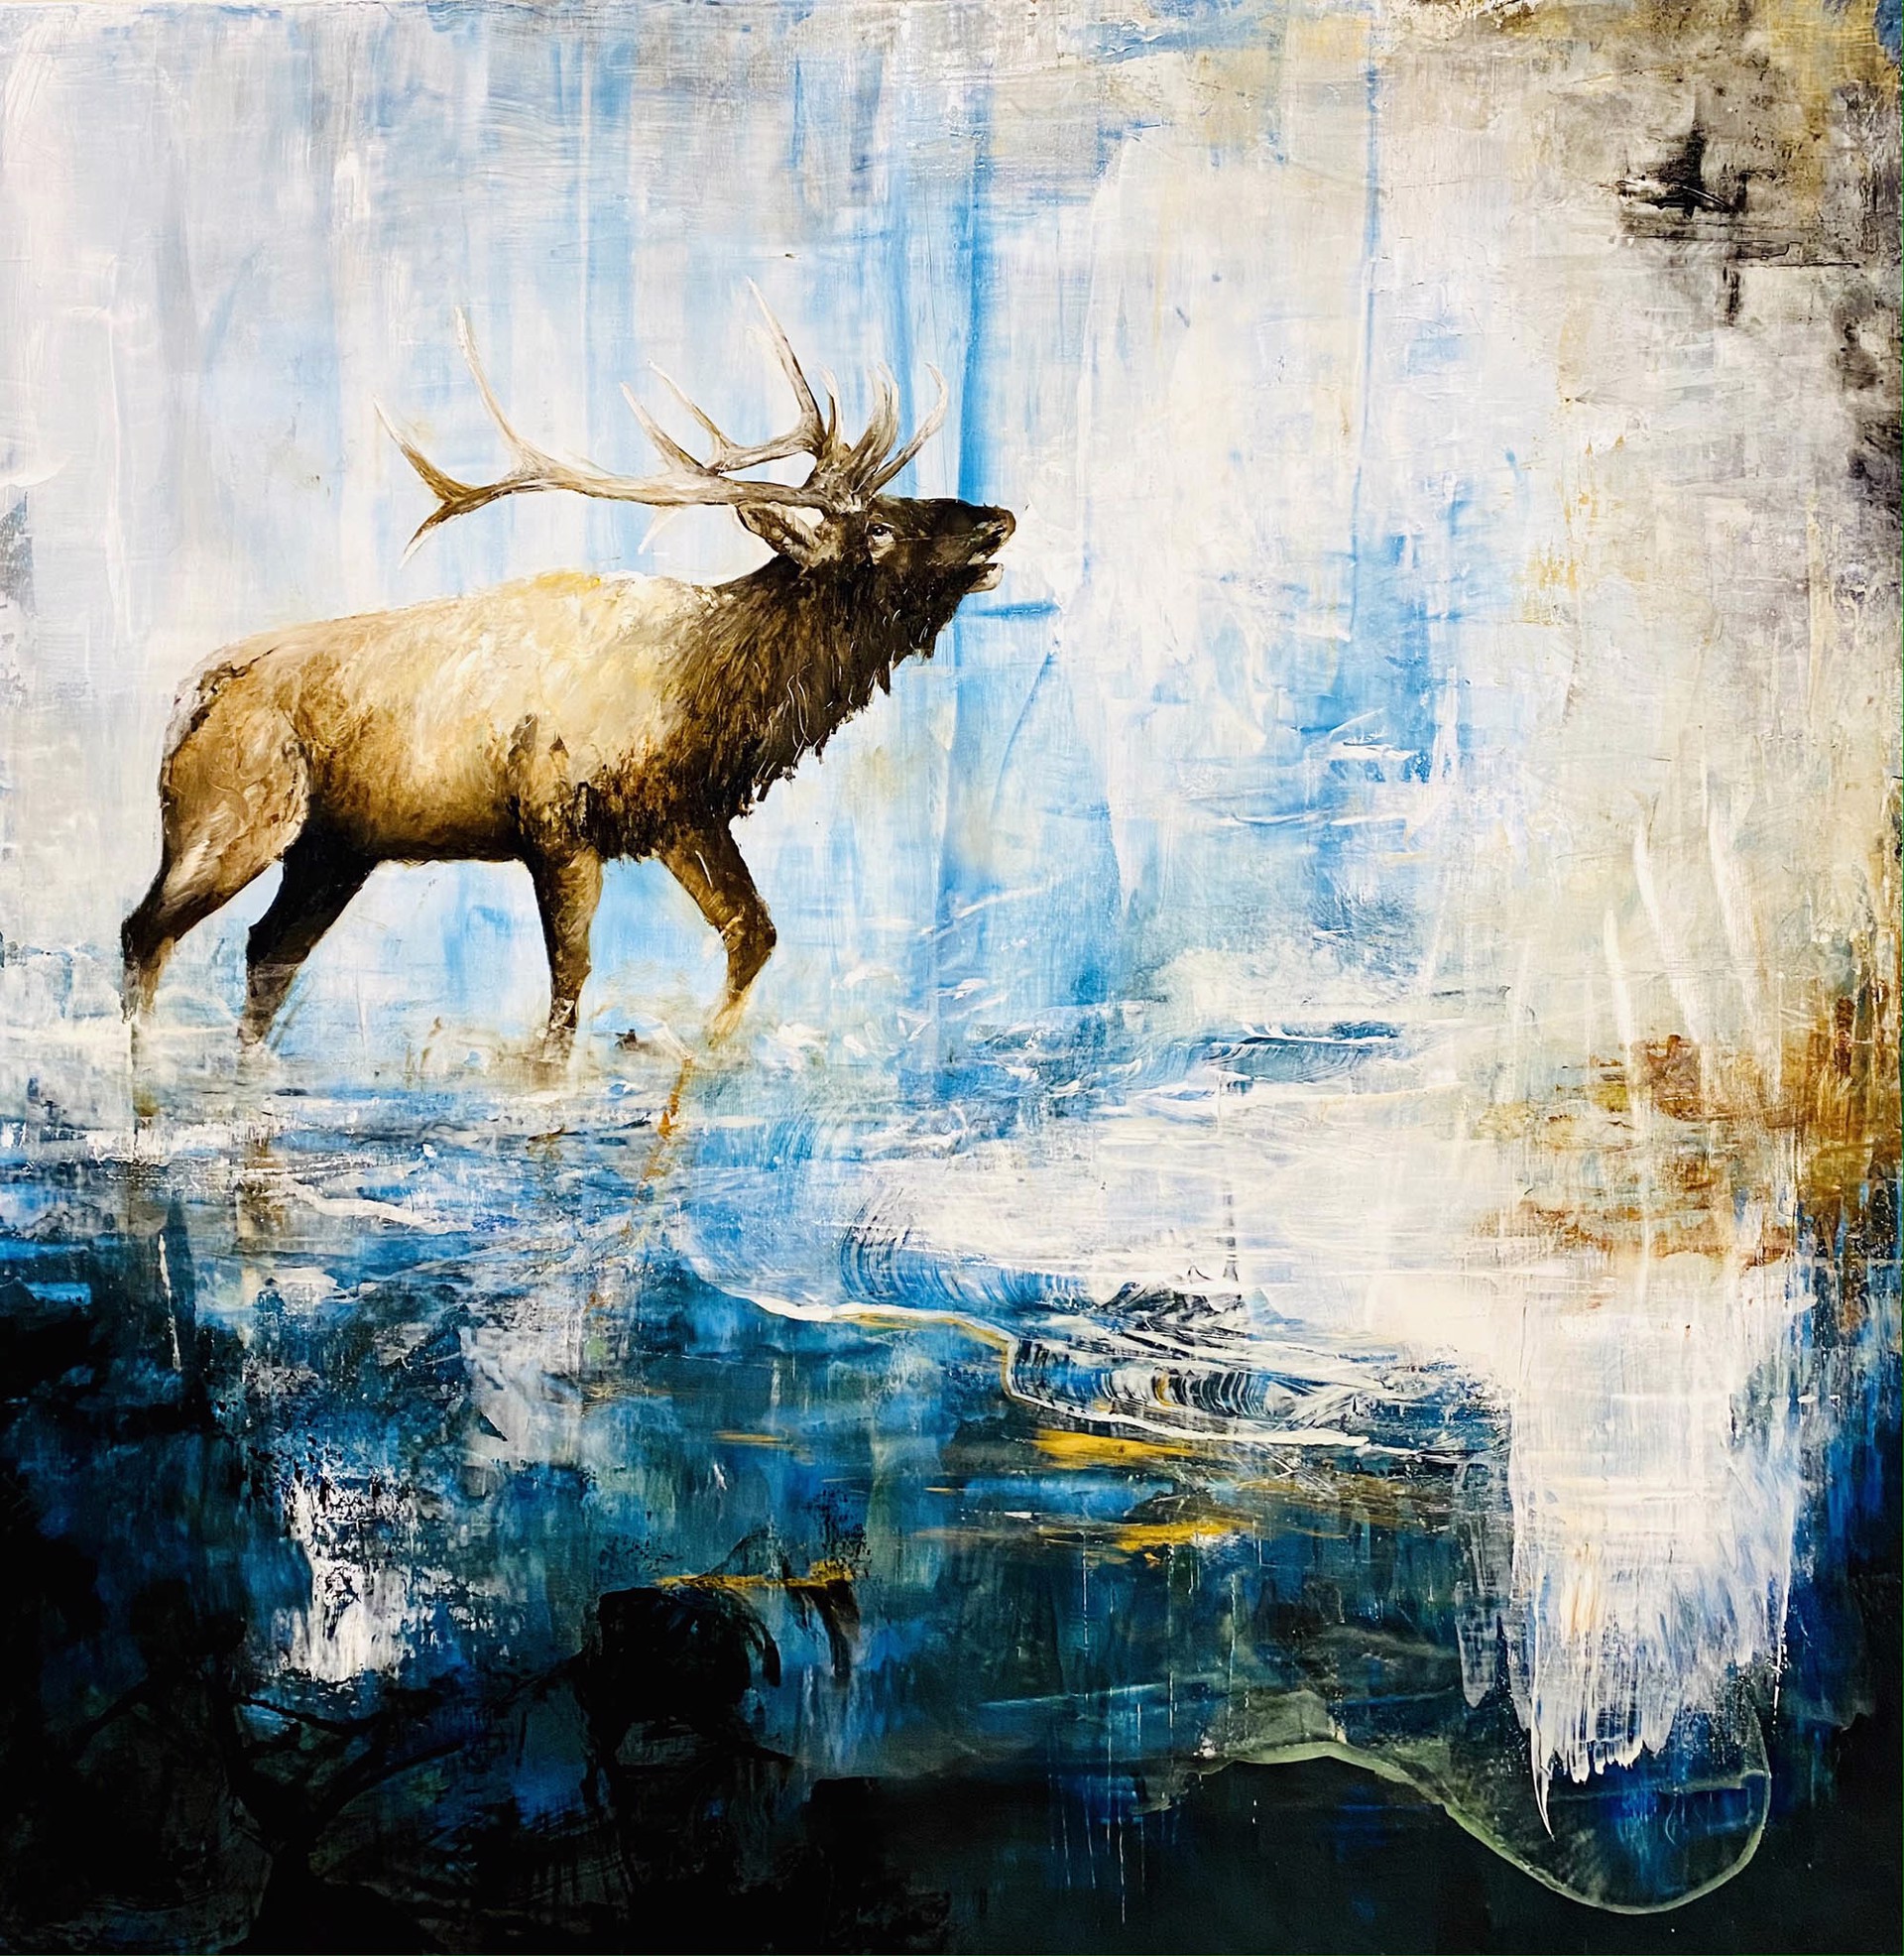 Original Oil Painting Featuring An Elk In Stride Over Abstract Background In Blues Whites And Yellow